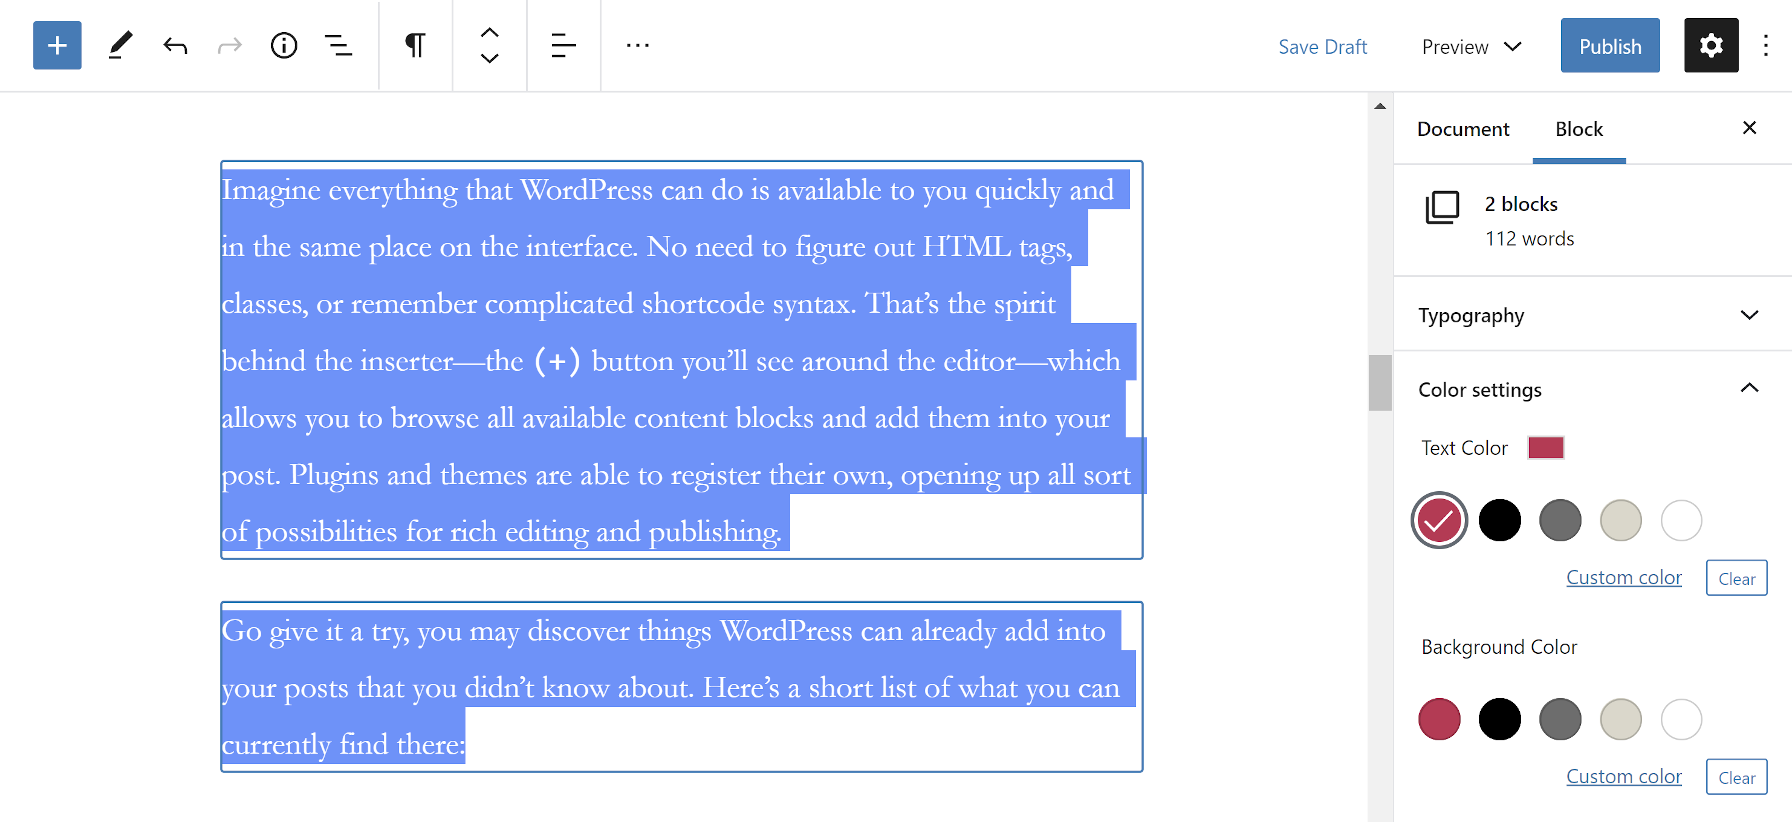 Editing the block options for two paragraphs.